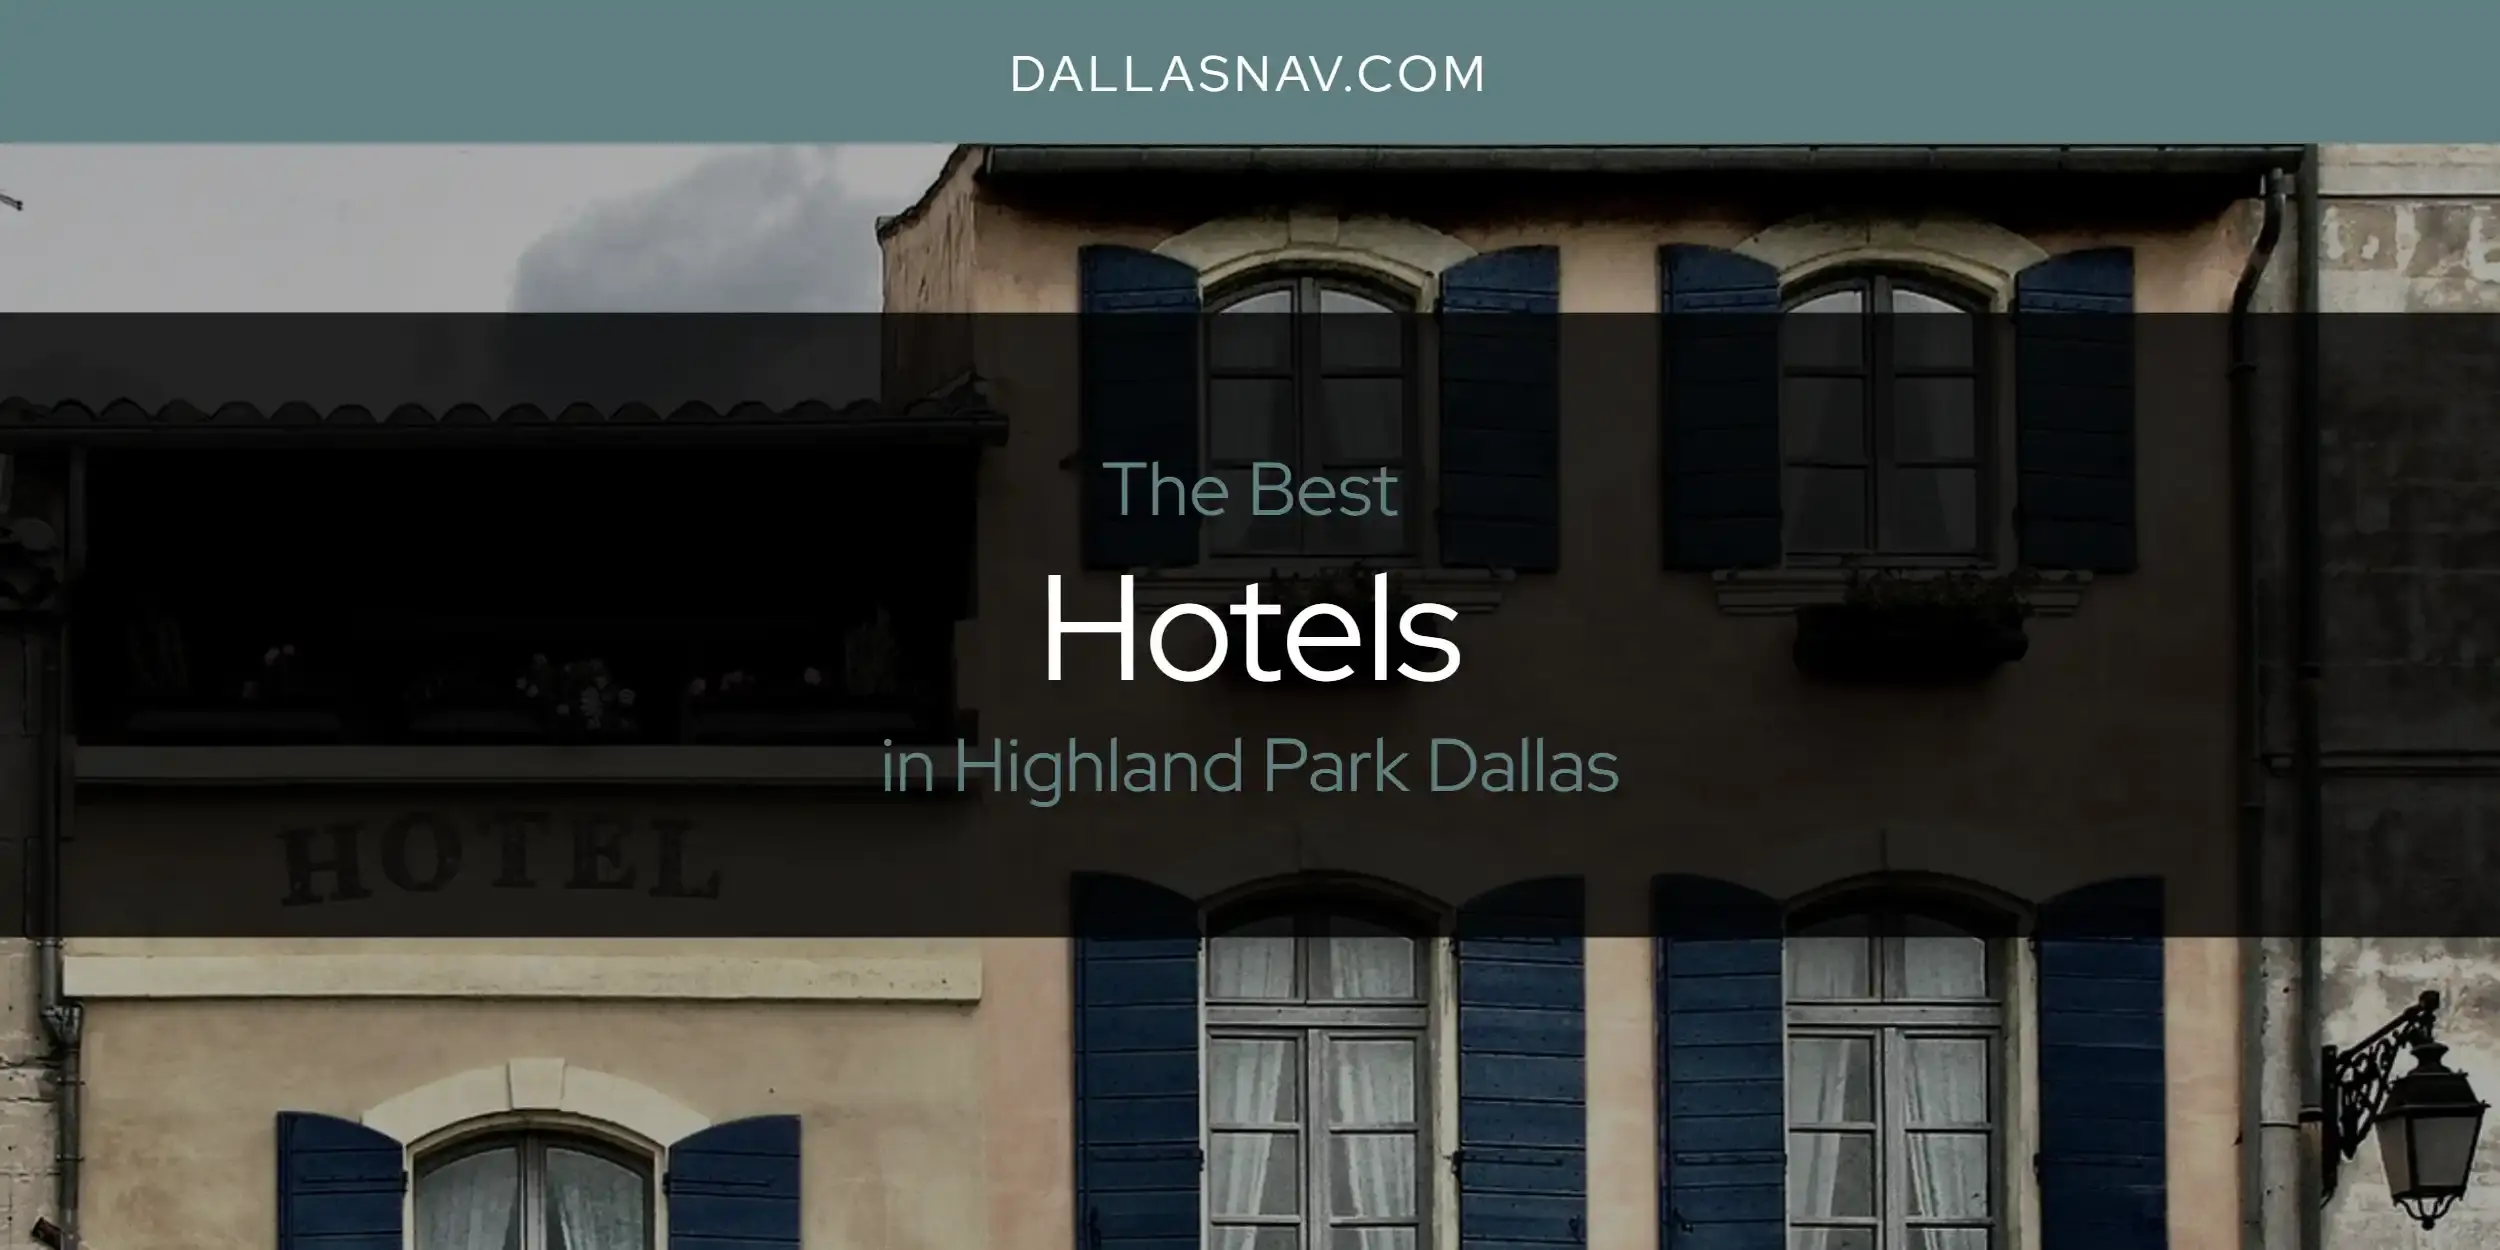 Best Hotels in Highland Park Dallas? Here's the Top 6